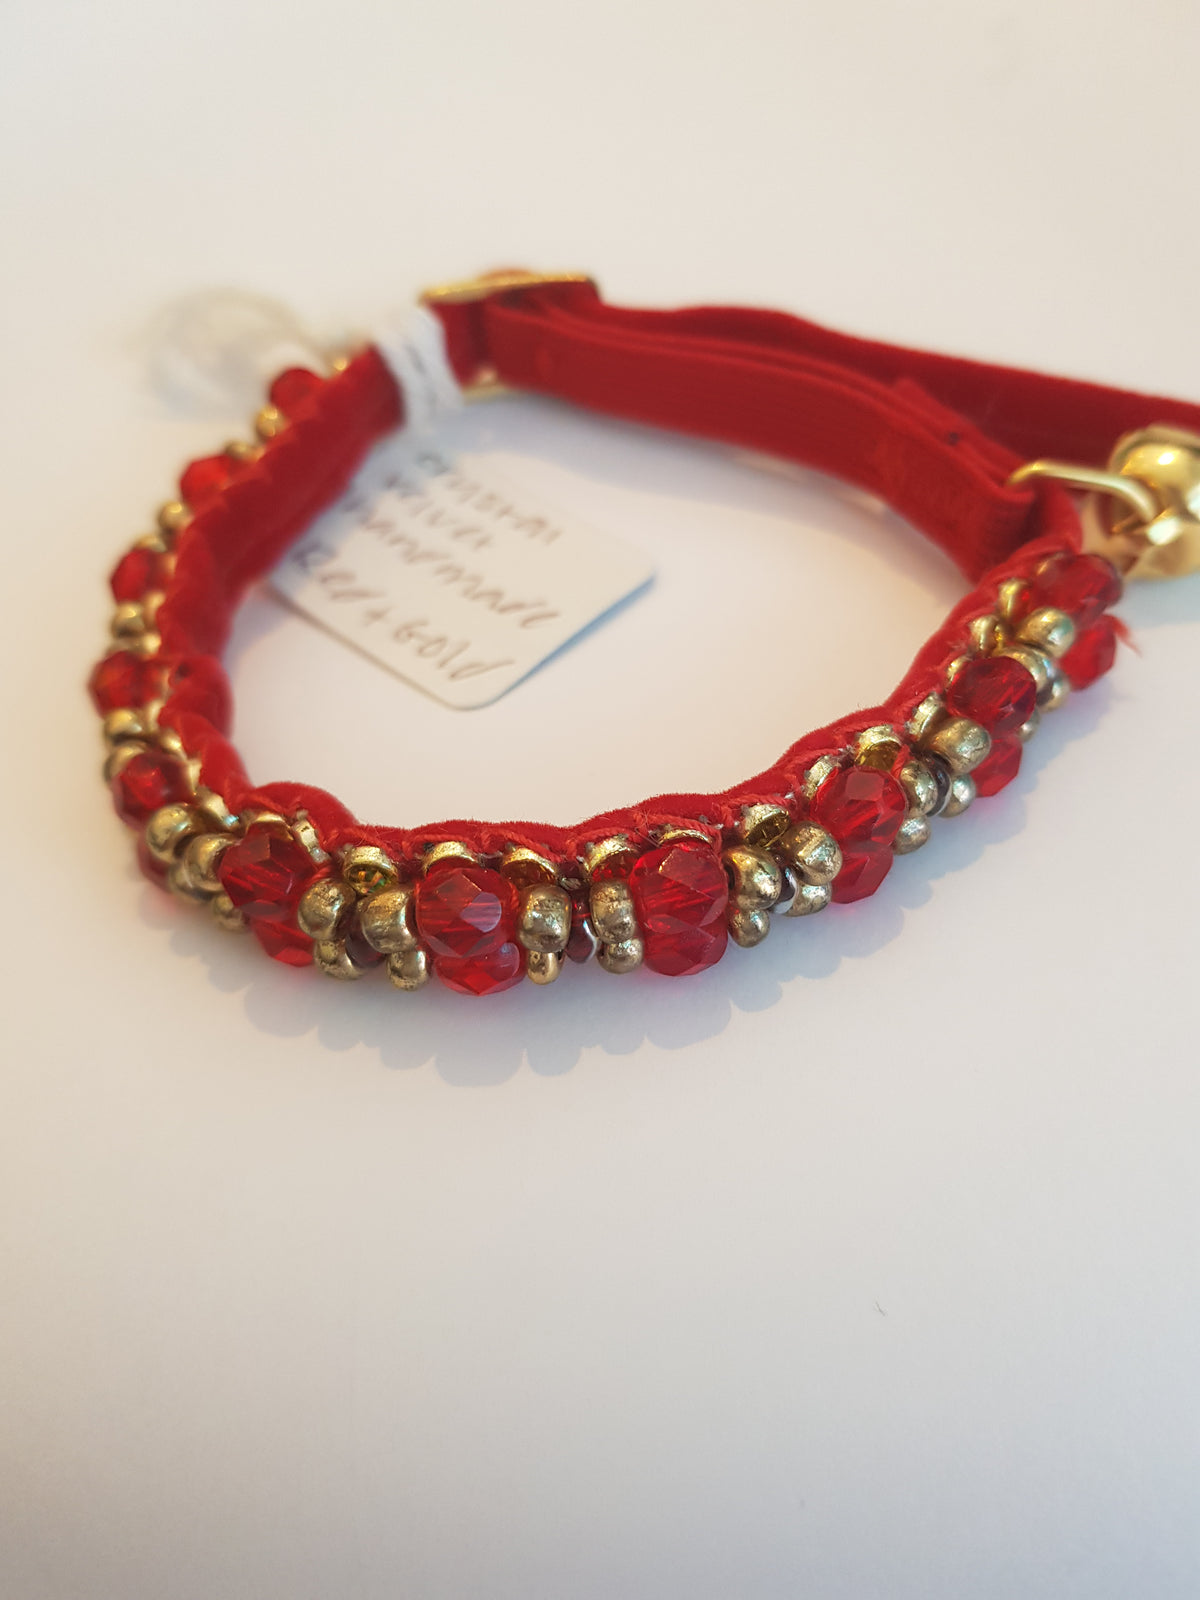 Handmade Red and Gold Cat Collar